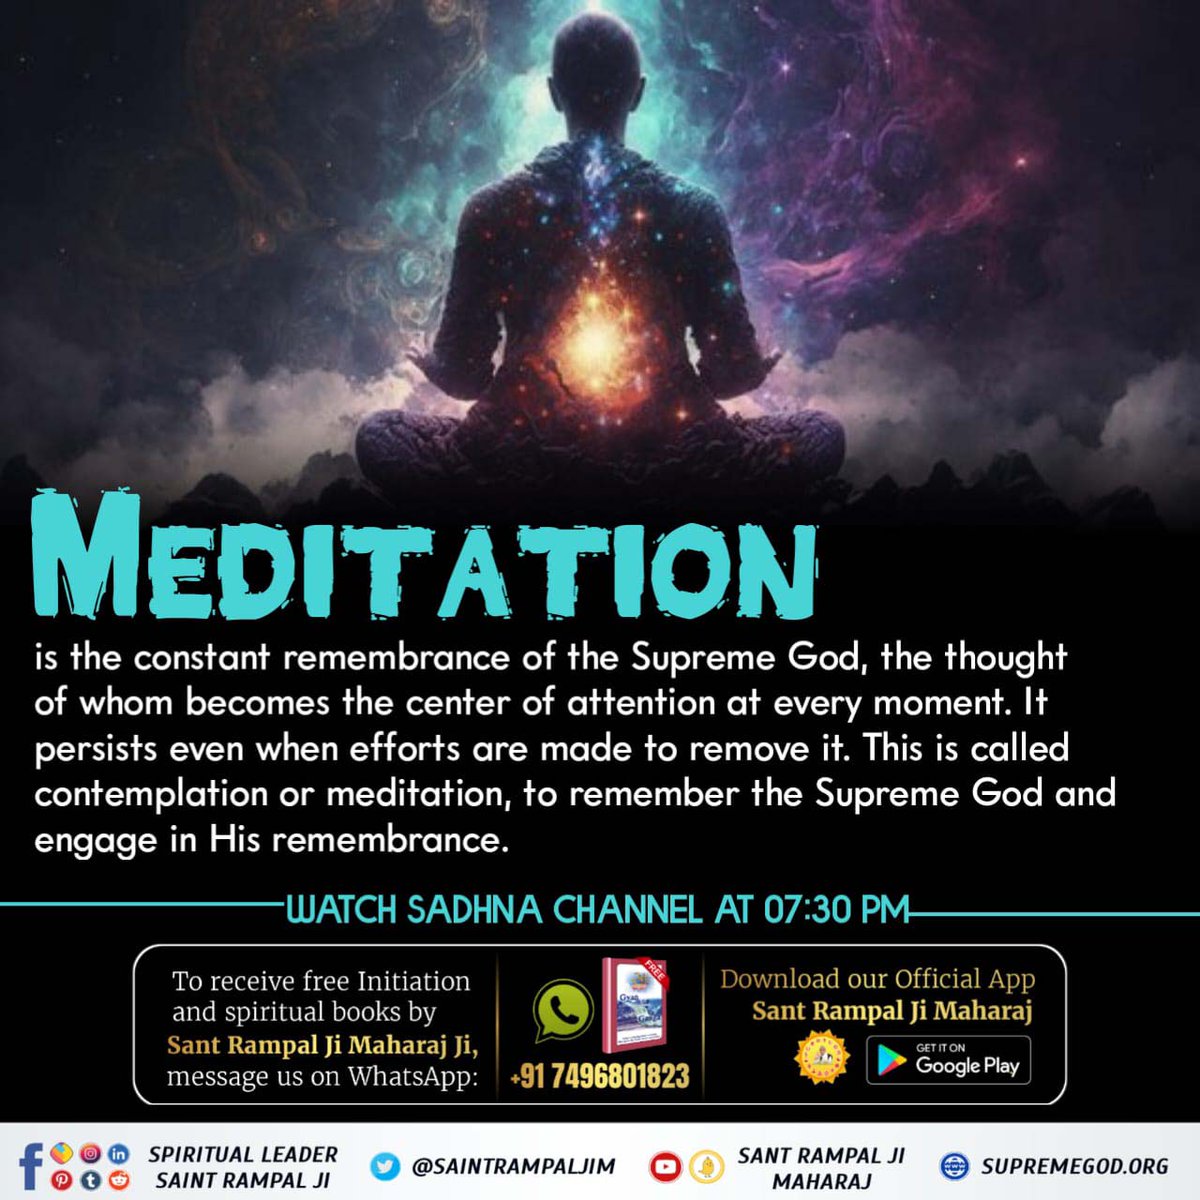 #What_Is_Meditation
Who is a hypocrite?
@SaintRampalJiM
A fool is said to be a hypocrite when he forcefully controls all of his senses, such as by sitting still while meditating.

Sant Rampal Ji Maharaj